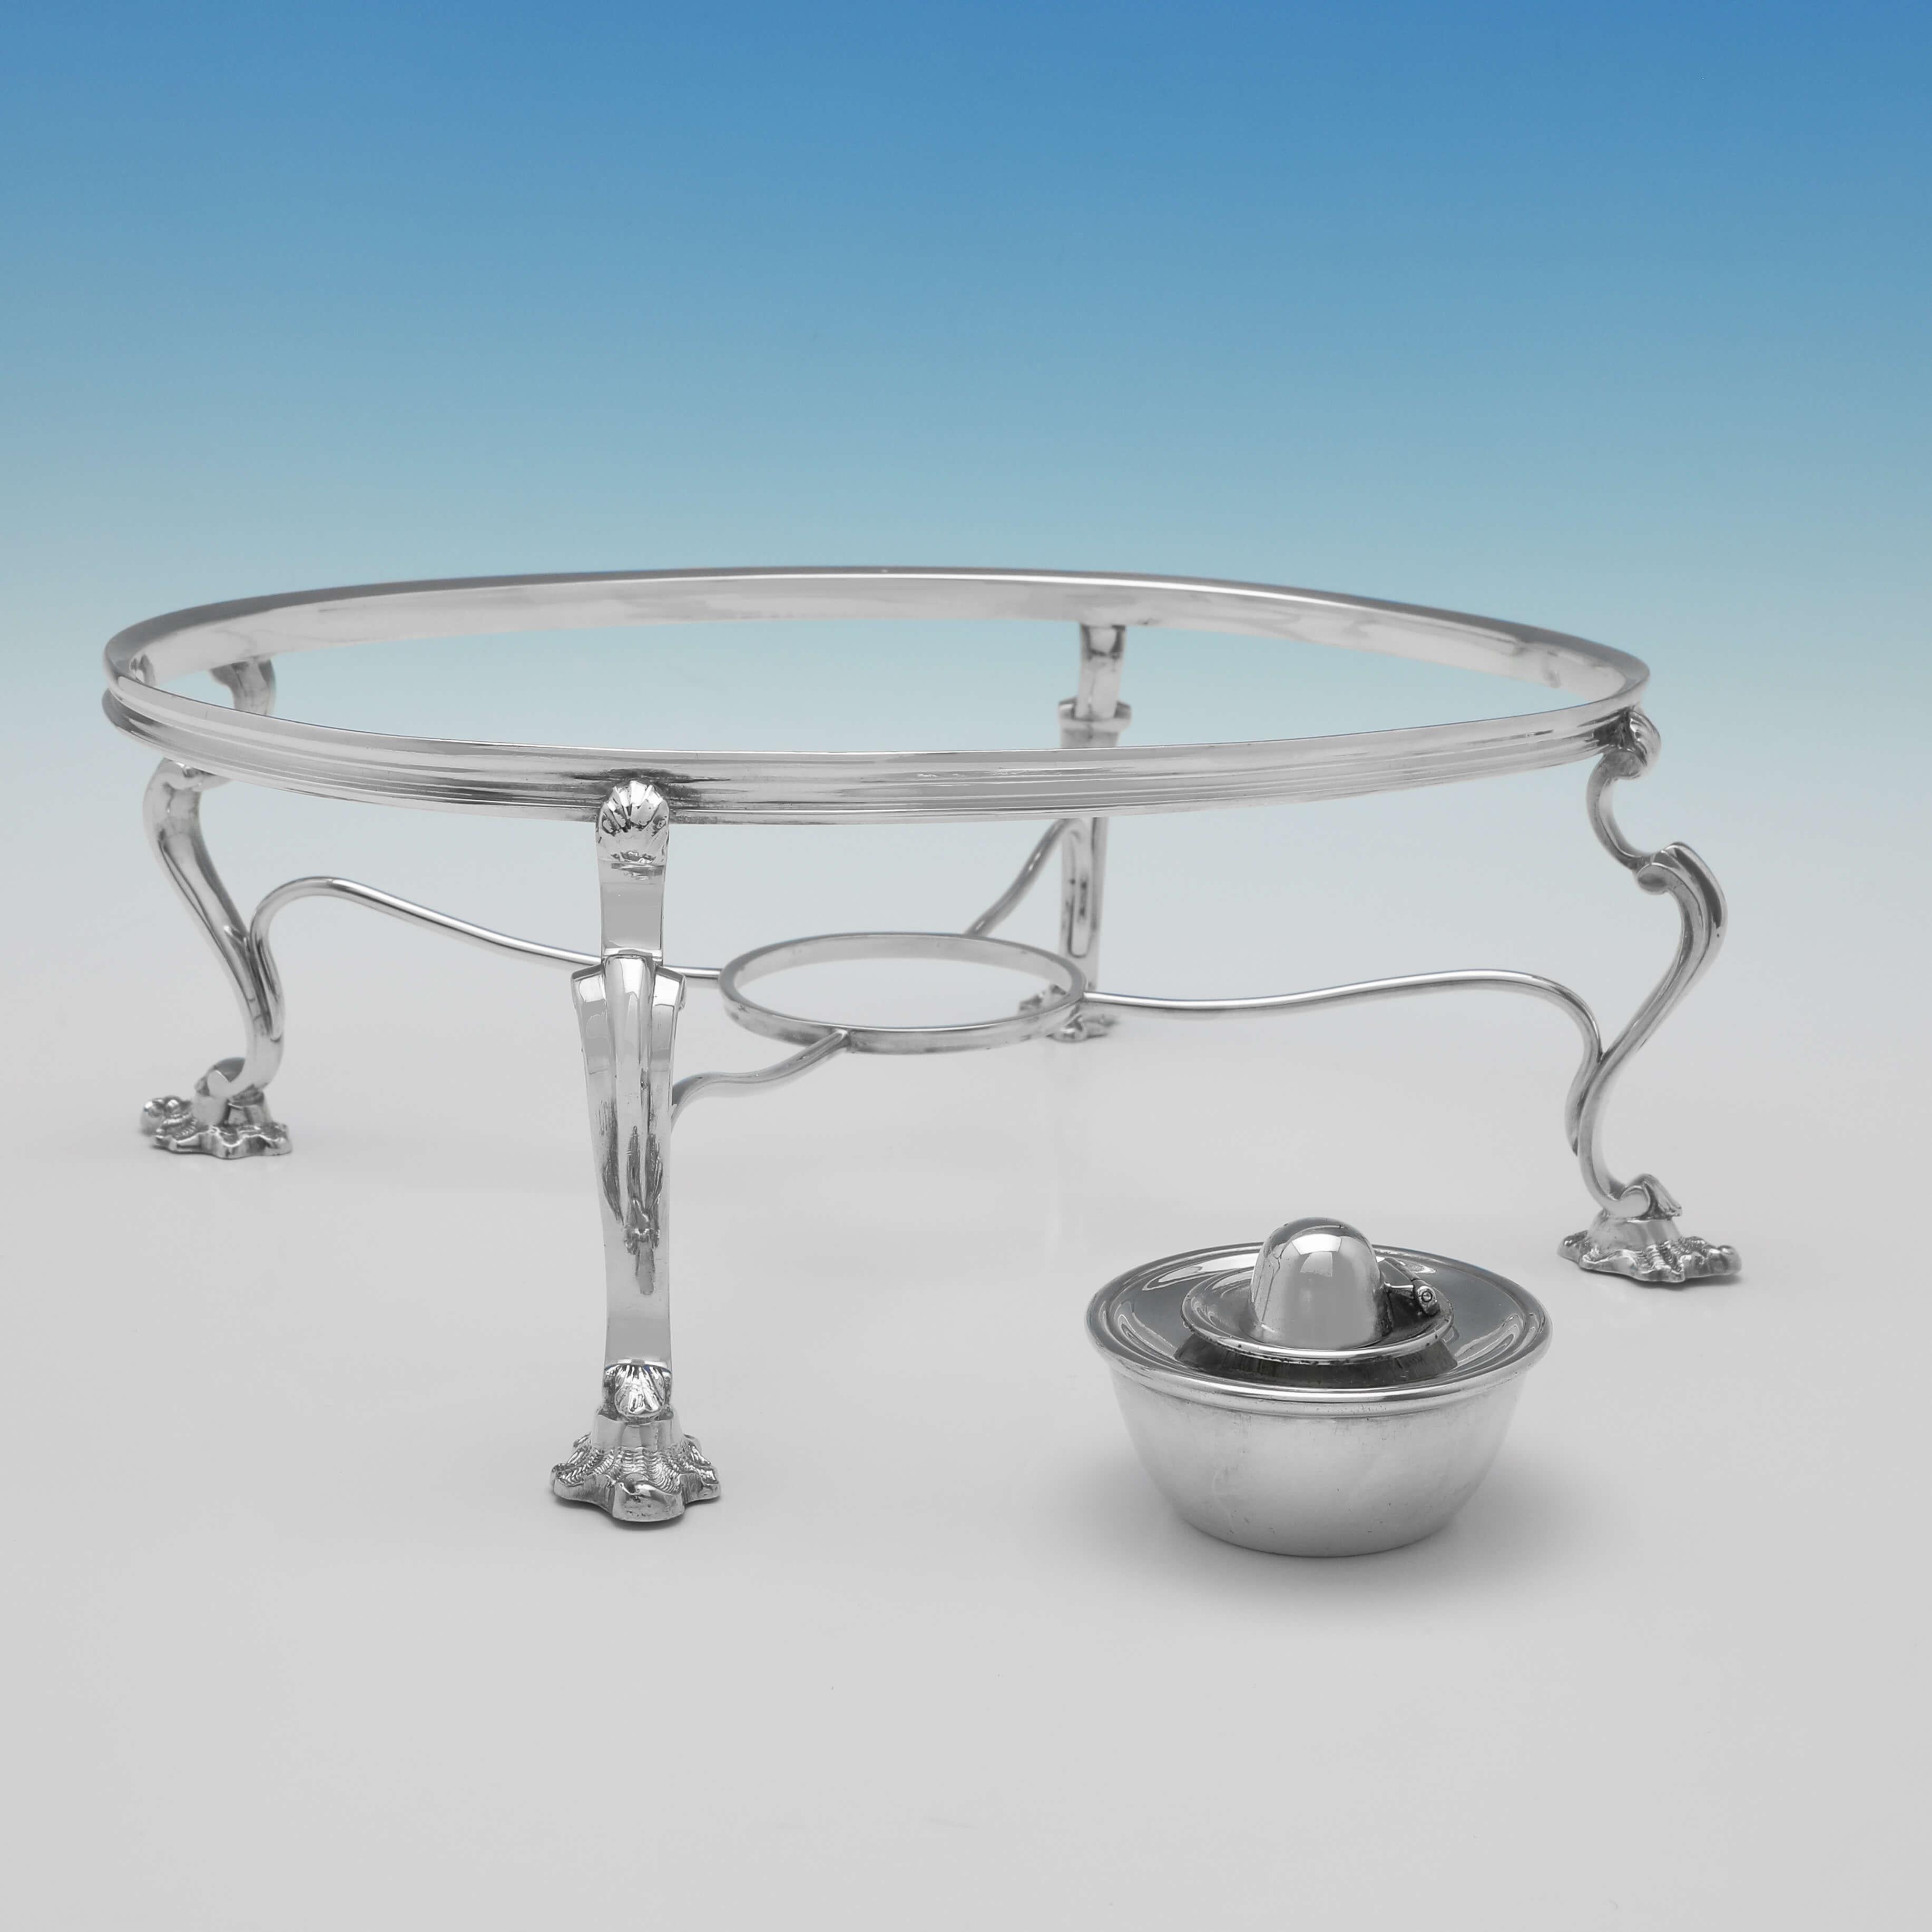 English William IV Antique Sterling Silver Pair of Entree Dishes on Silver Plated Stands For Sale